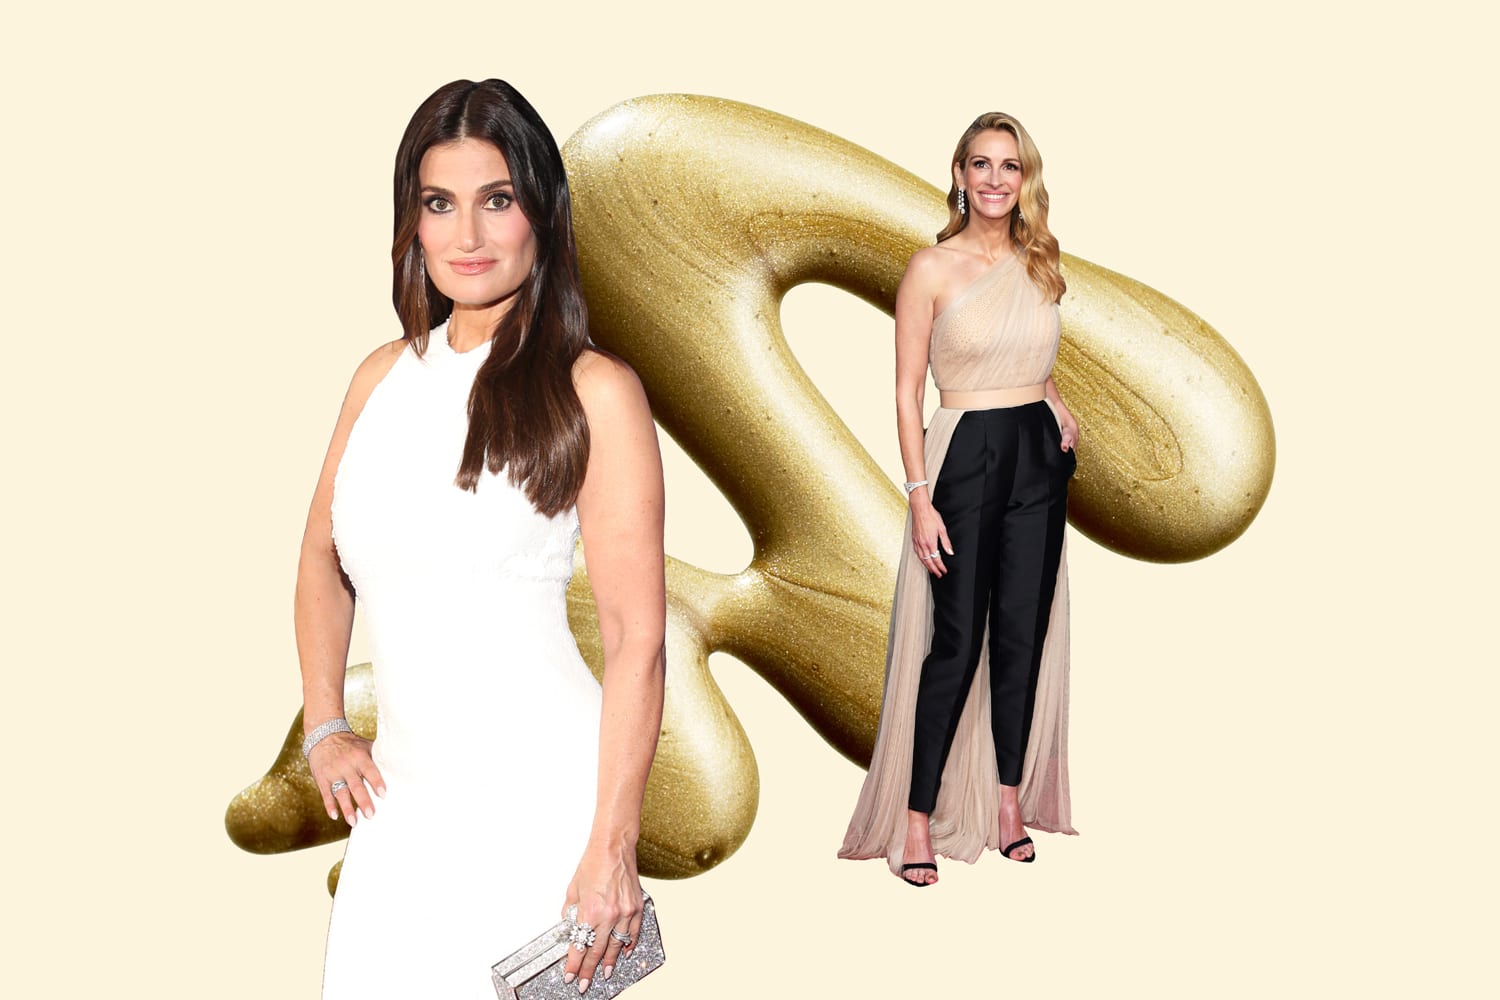 Idina Menzel and Julia Roberts in front of a gold swatch of nail polish.